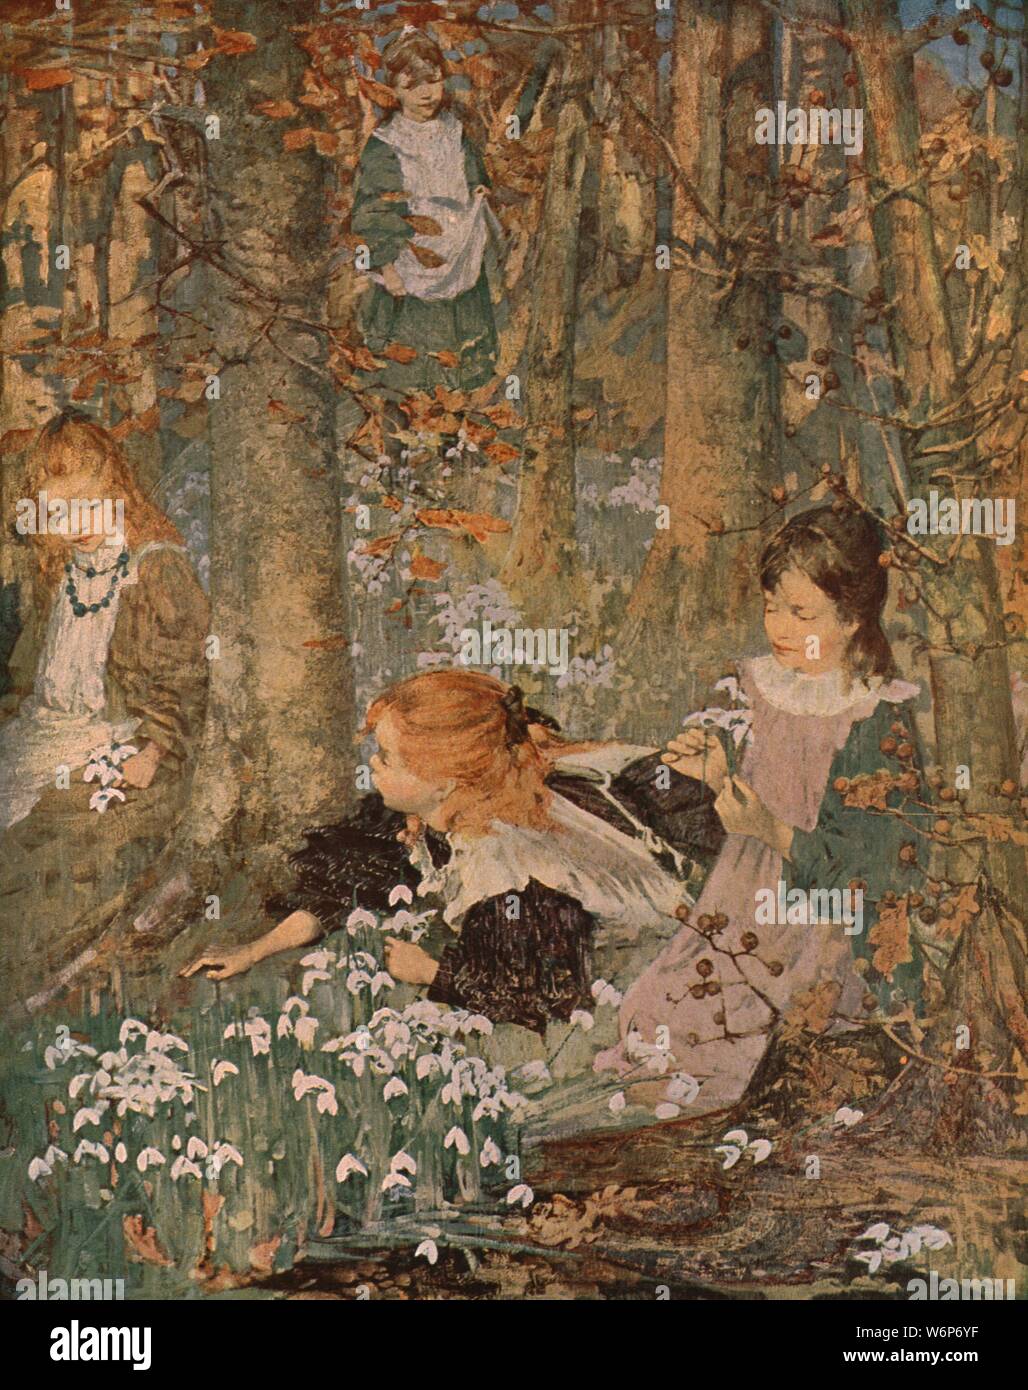 'The Coming of Spring', 1899, (c1930). A group of girls celebrate the coming of Spring, indicated by the snowdrops in the foreground. Painting in the Glasgow Museums Service collection, Glasgow, Scotland. From &quot;Modern Masterpieces of British Art&quot;. [The Amalgamated Press Ltd., London, c1930] Stock Photo